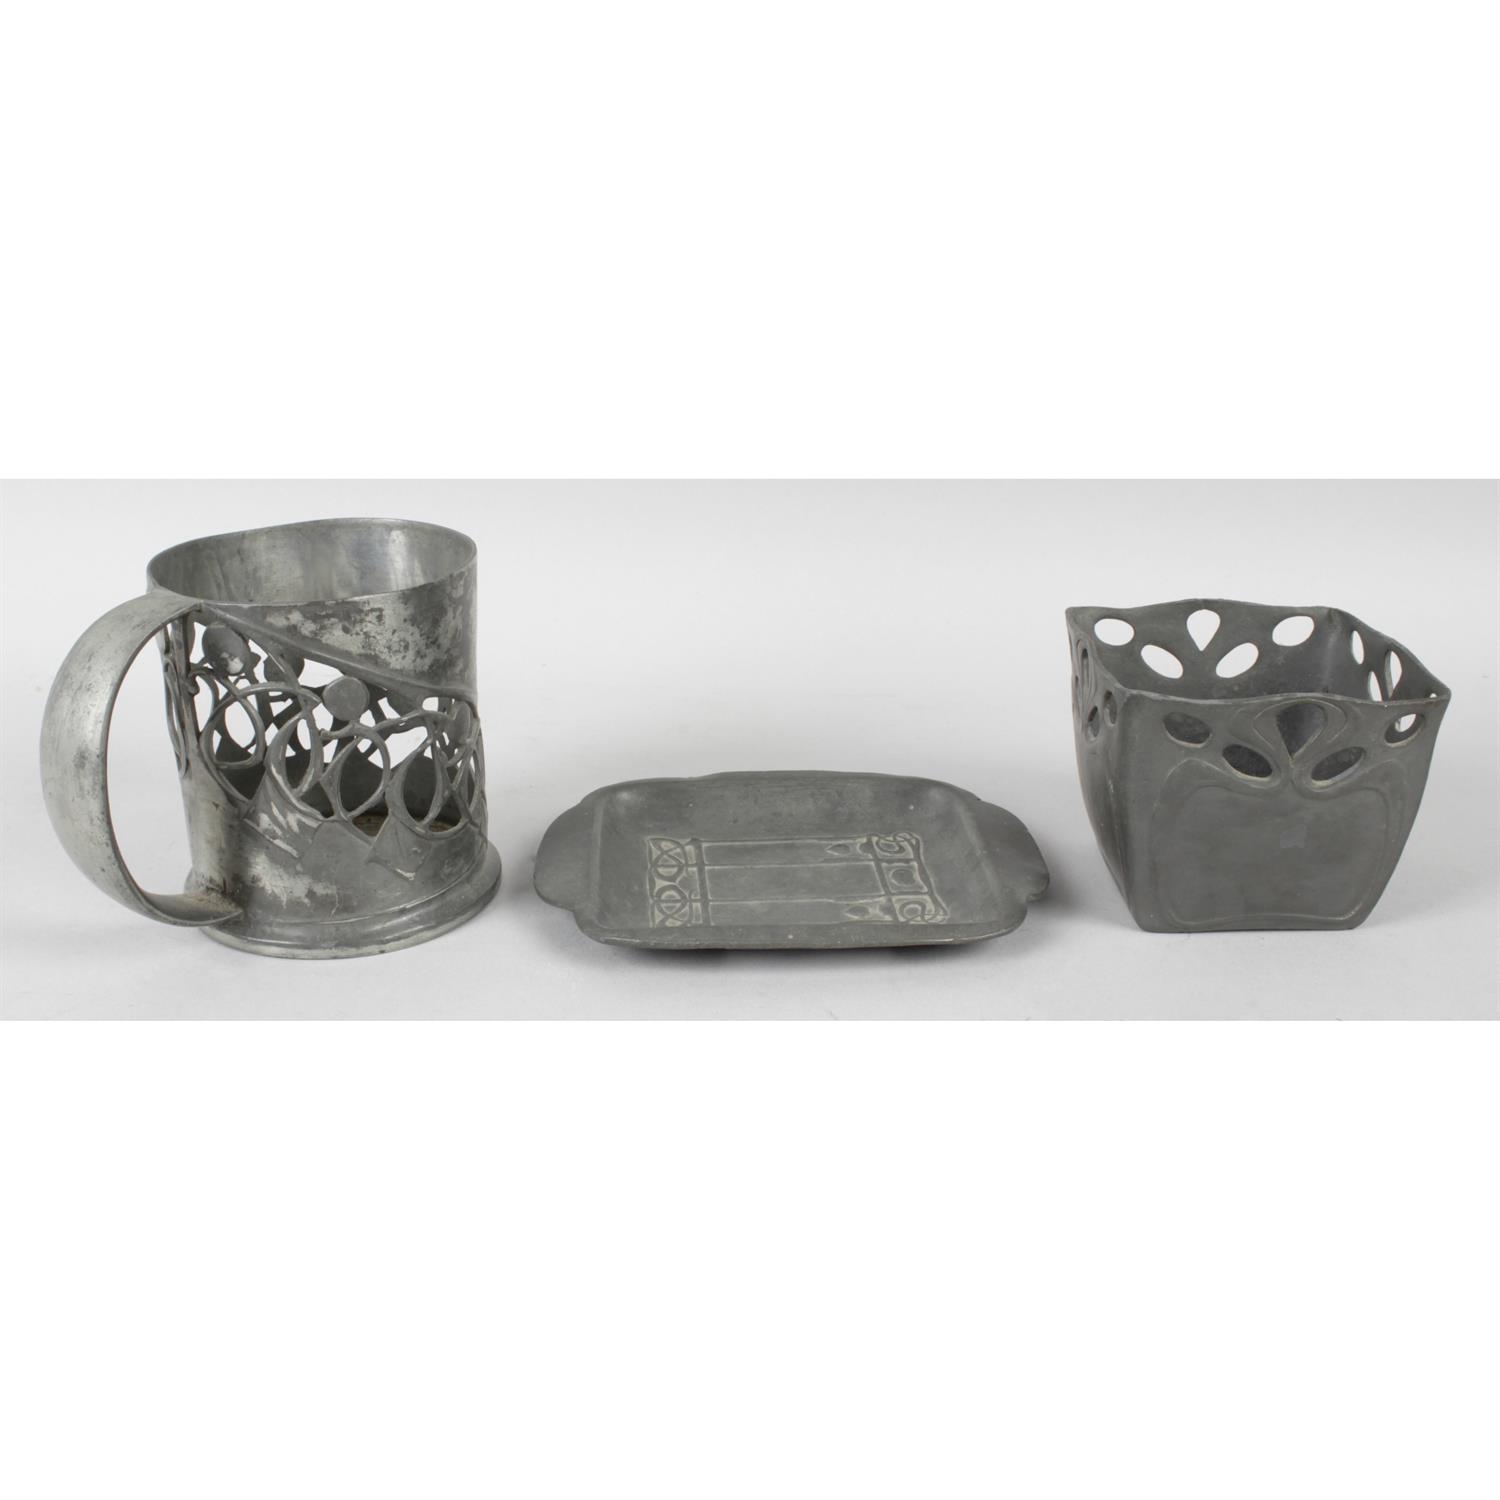 Three pieces of Art Nouveau pewter